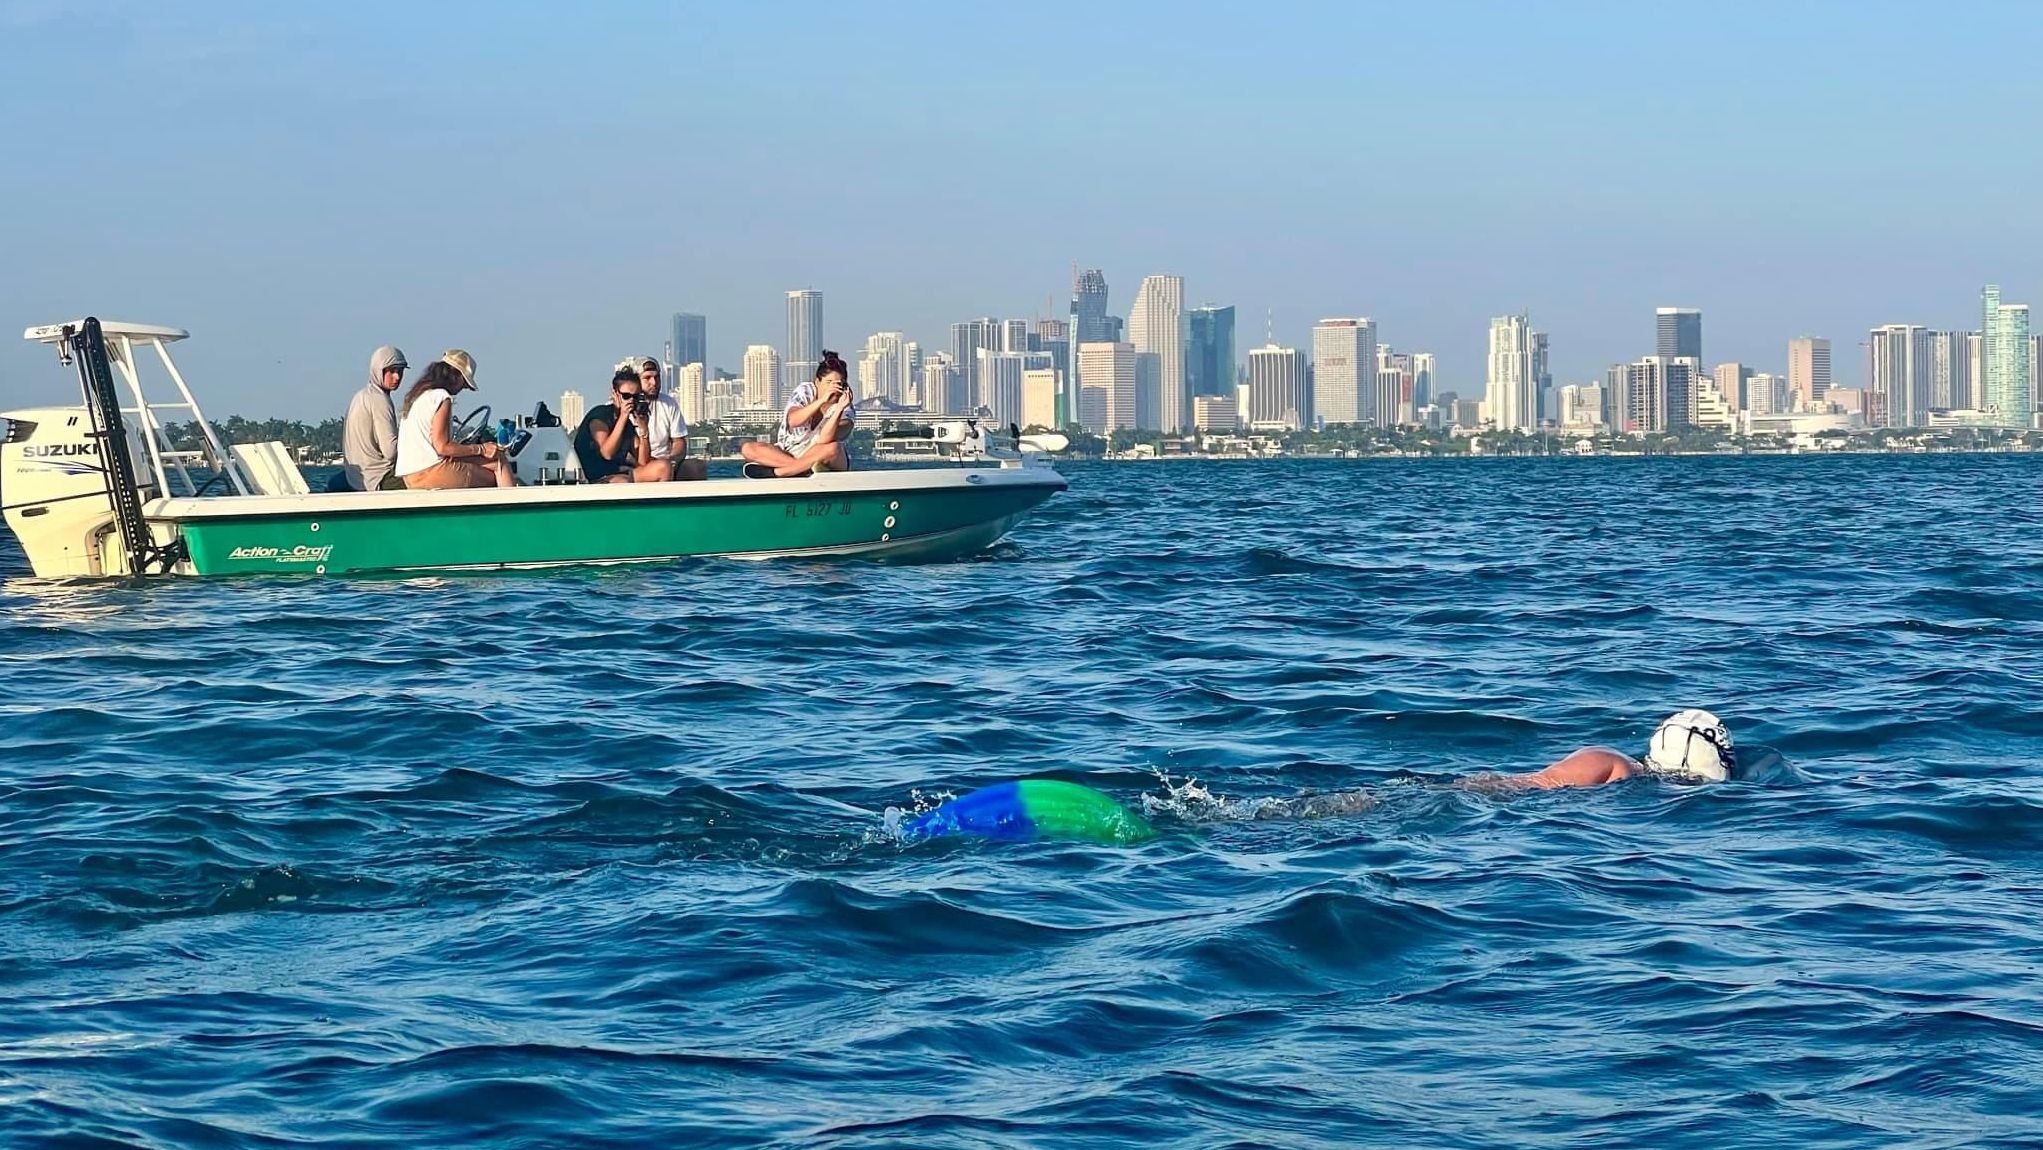 During her swim, Liivand collected trash found in the ocean.